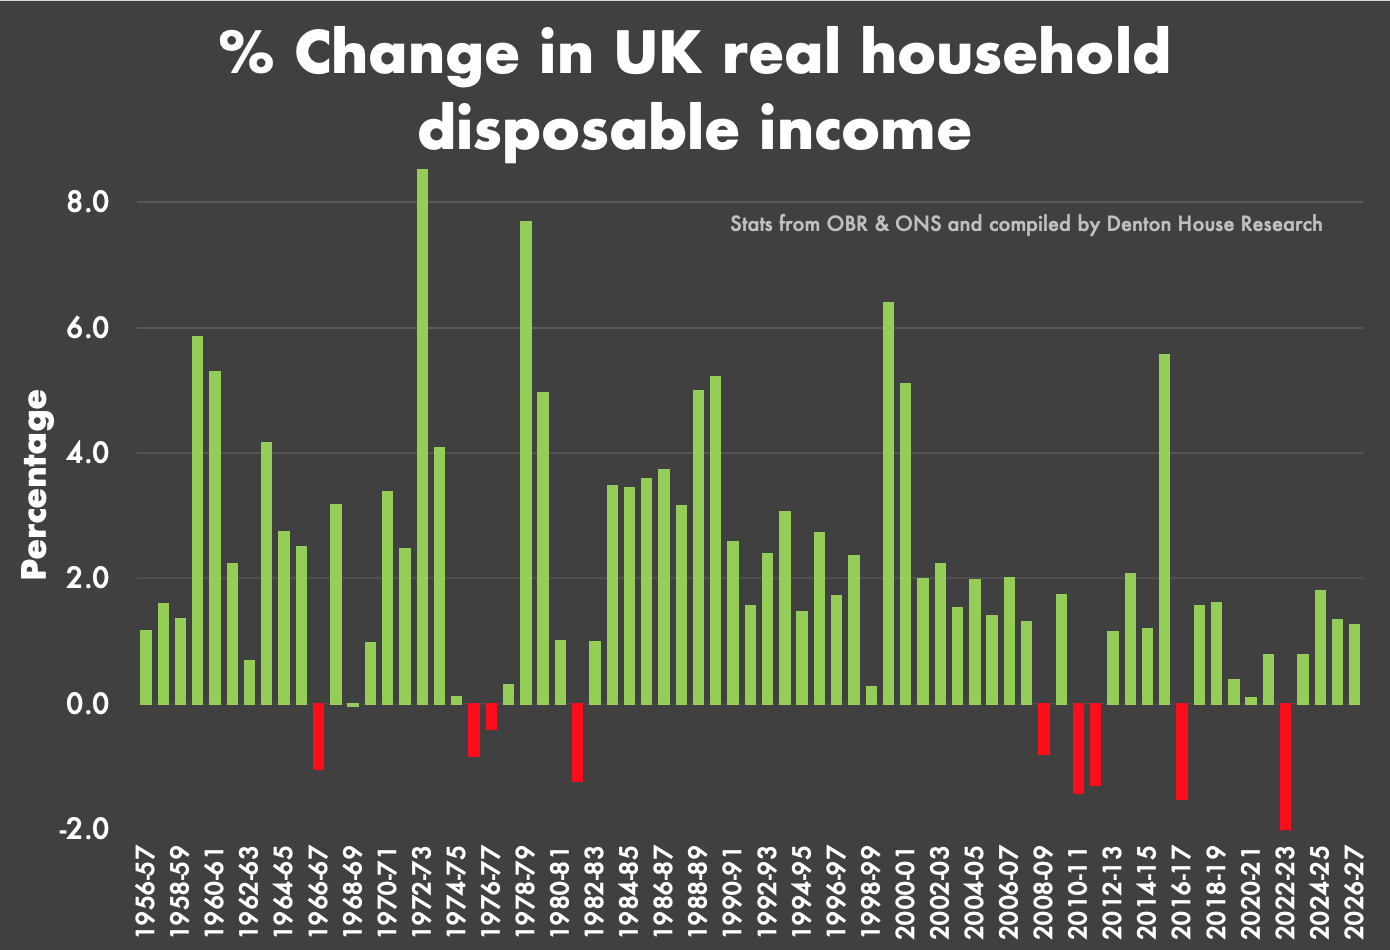 Change in UK real household disposable income